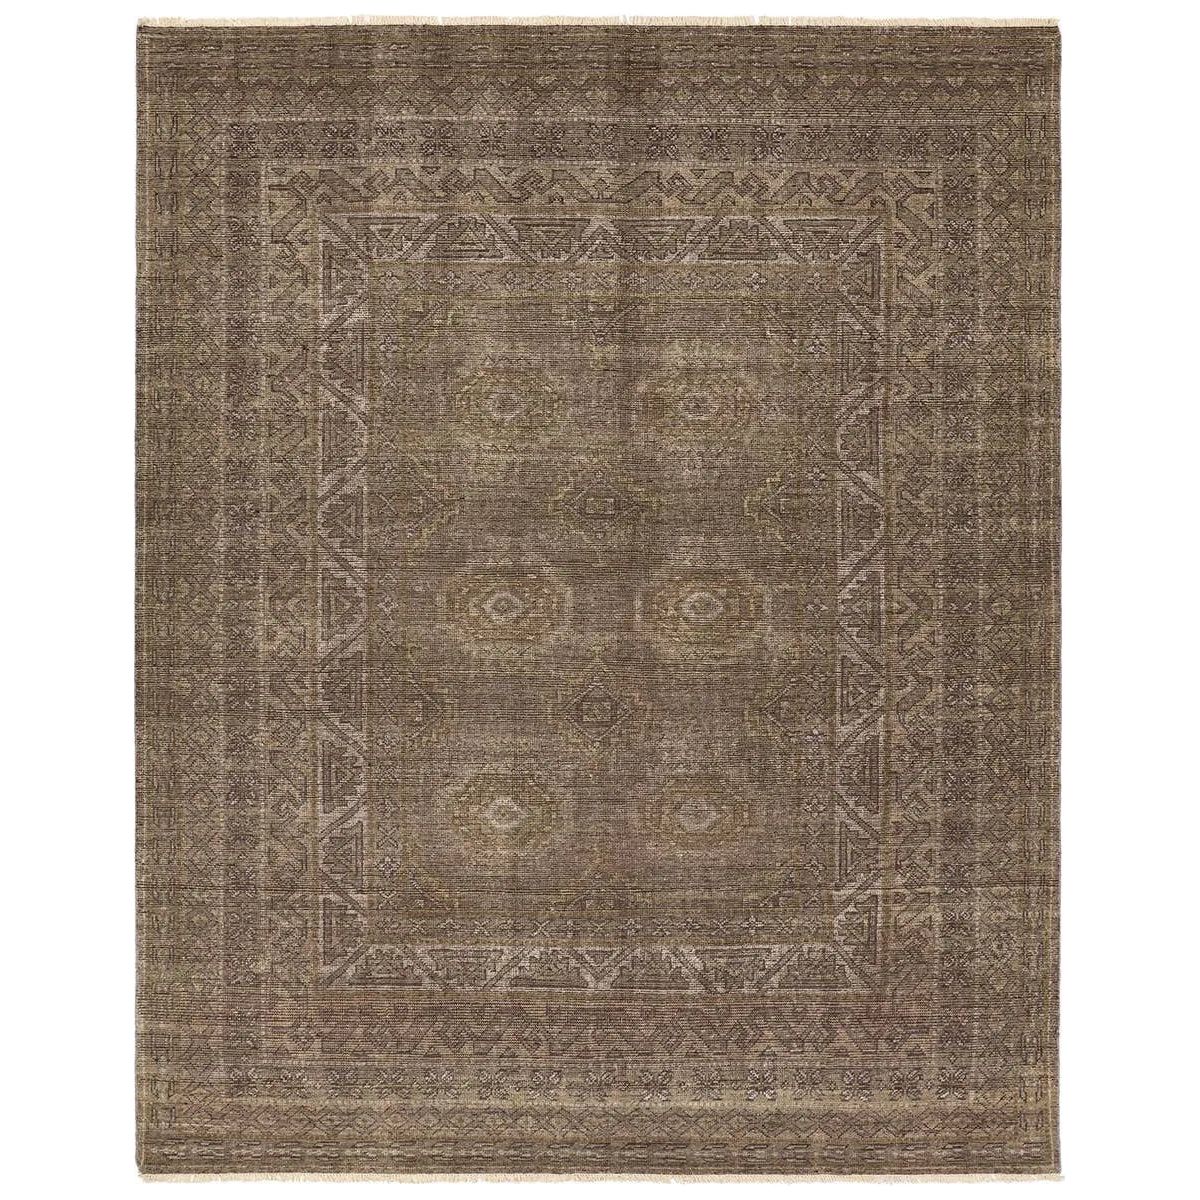 The Rhapsody Kortan features heirloom-quality designs of stunningly abrashed Old World patterns. The Kortan area rug boasts a beautifully distressed mini-medallion motif with a decorative, multi-layered border and geometric detailing. The brown, cream, and tan hues add depth and intrigue. Amethyst Home provides interior design, new home construction design consulting, vintage area rugs, and lighting in the Charlotte metro area.